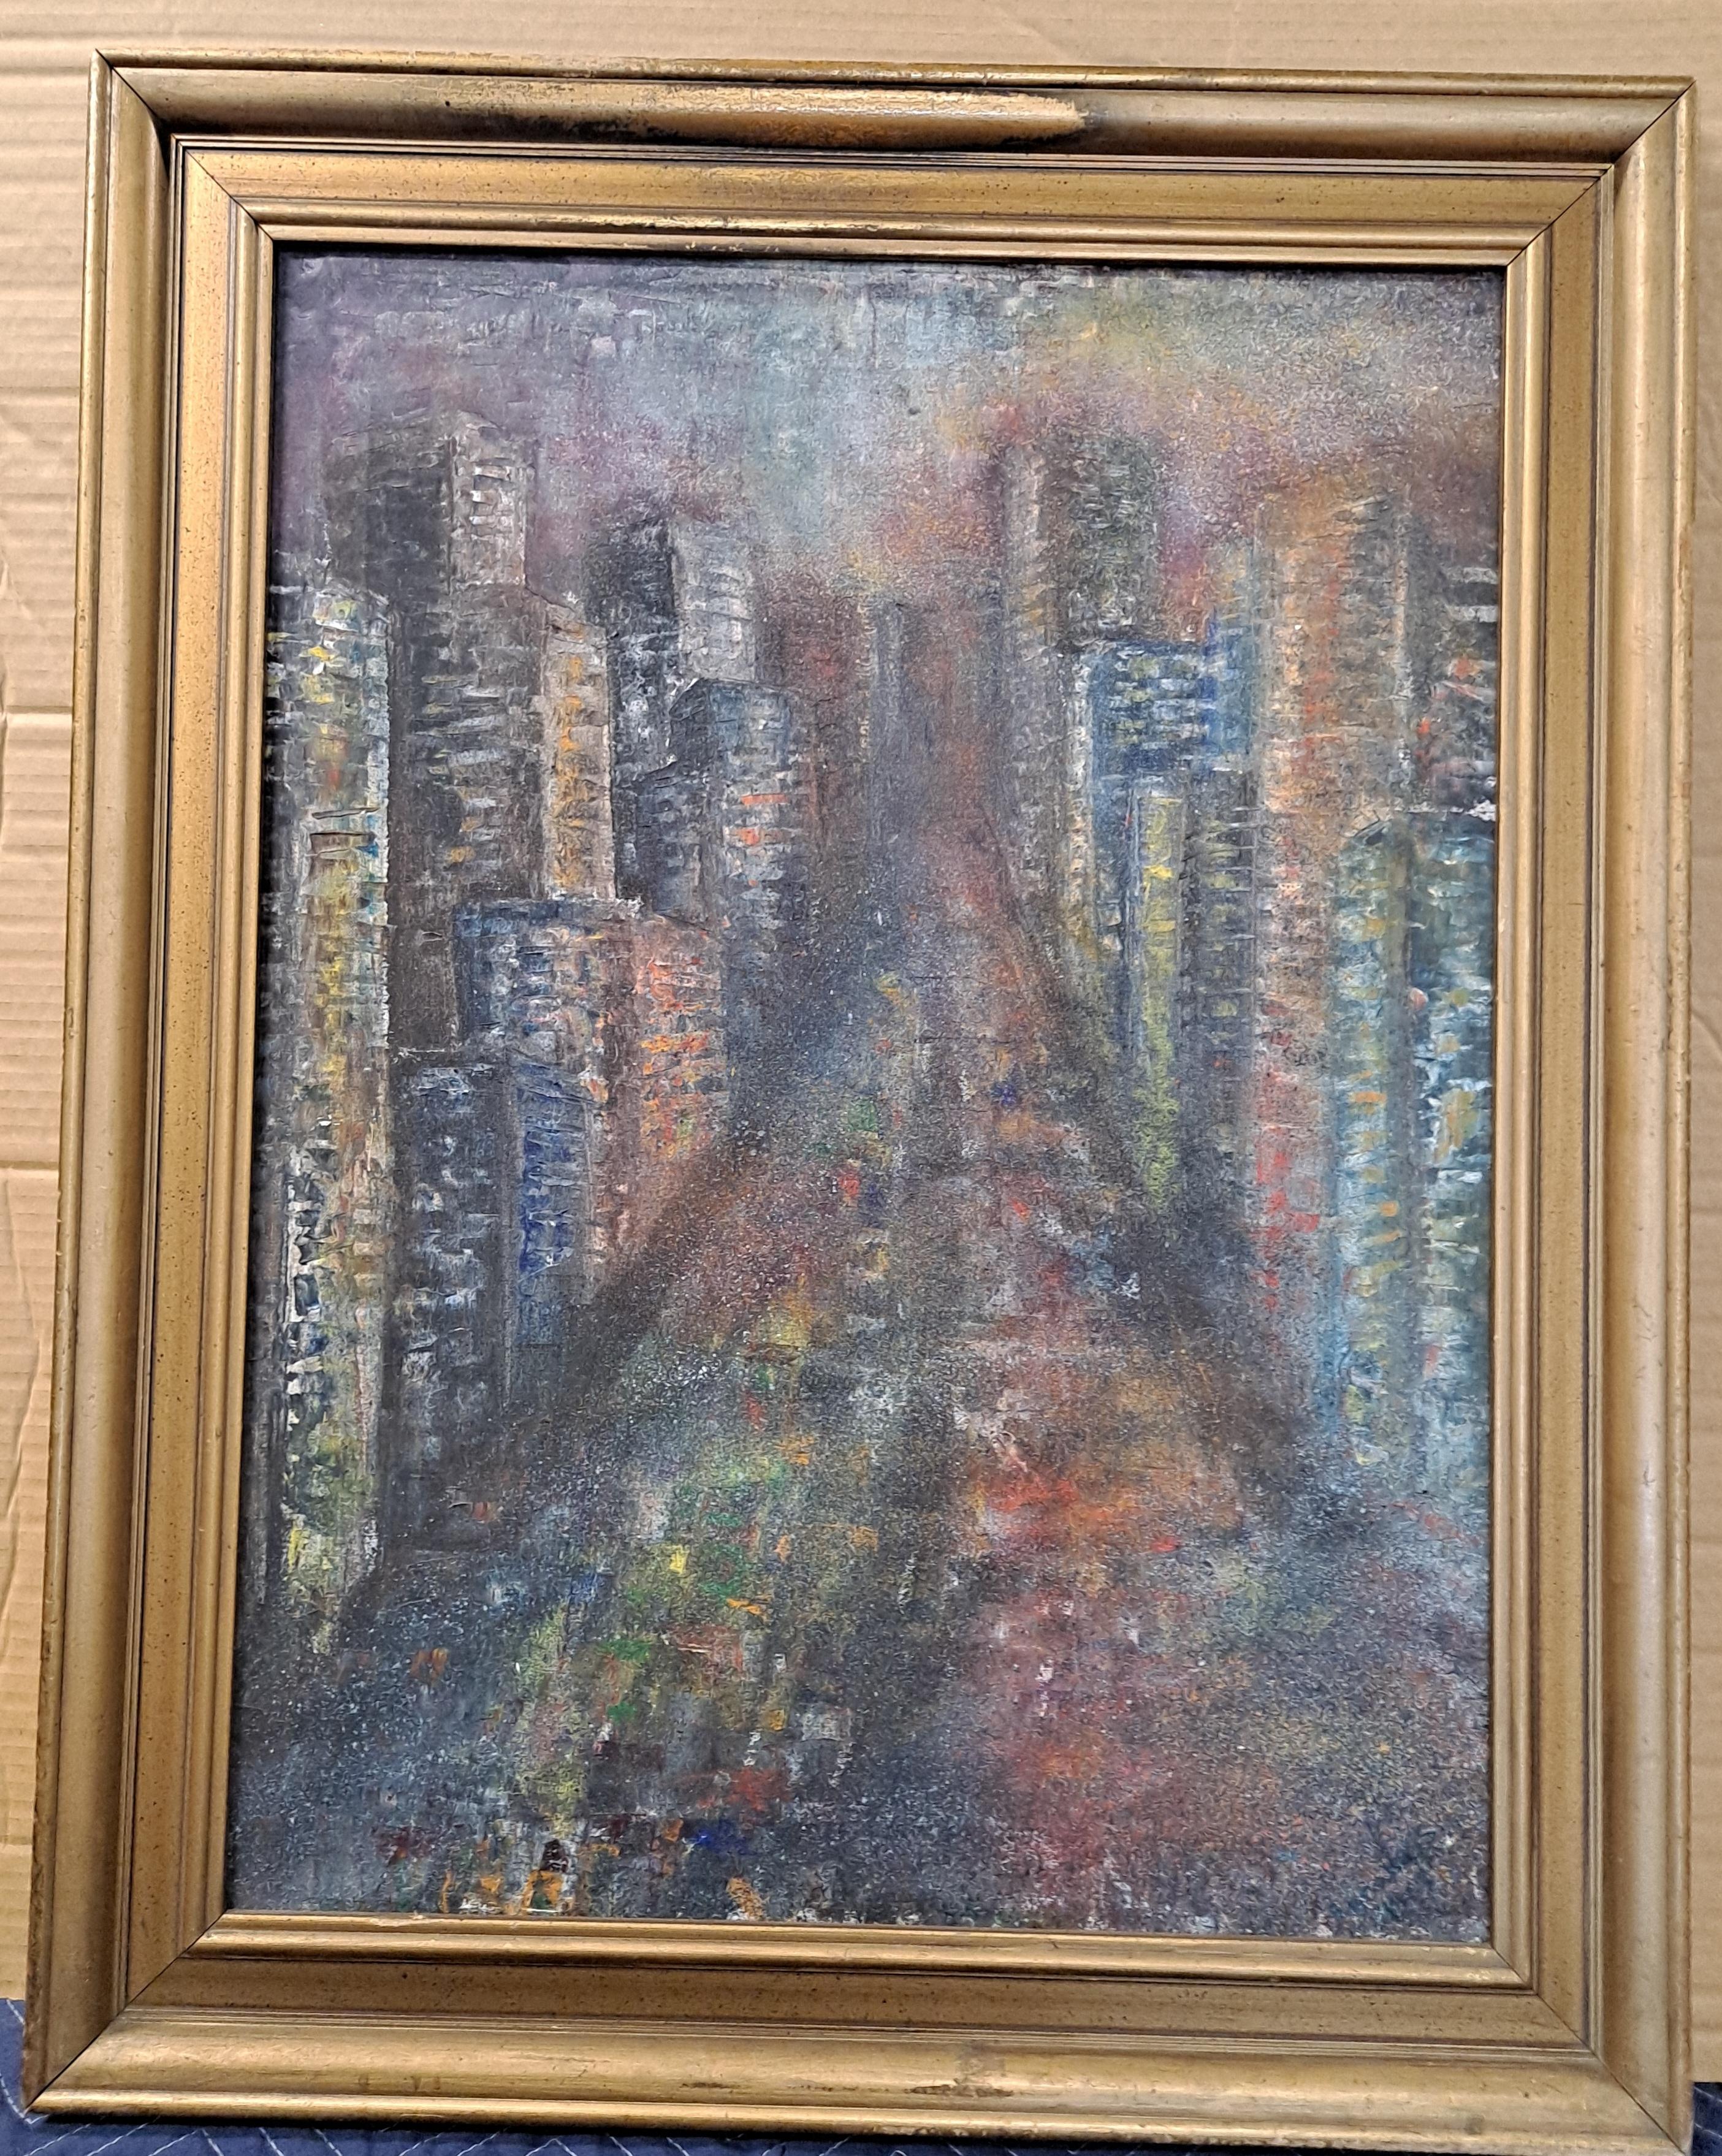 Senaka Senanayake (1951-active) "New York, 5th Avenue" abstract
Oil on canvas
22" W x 29.25" H
Frame: 28" W x 35.75" H

Biography
Senaka was born on 20 March 1951 in an illustrious family of Sri Lanka, which produced two Prime Ministers. He was